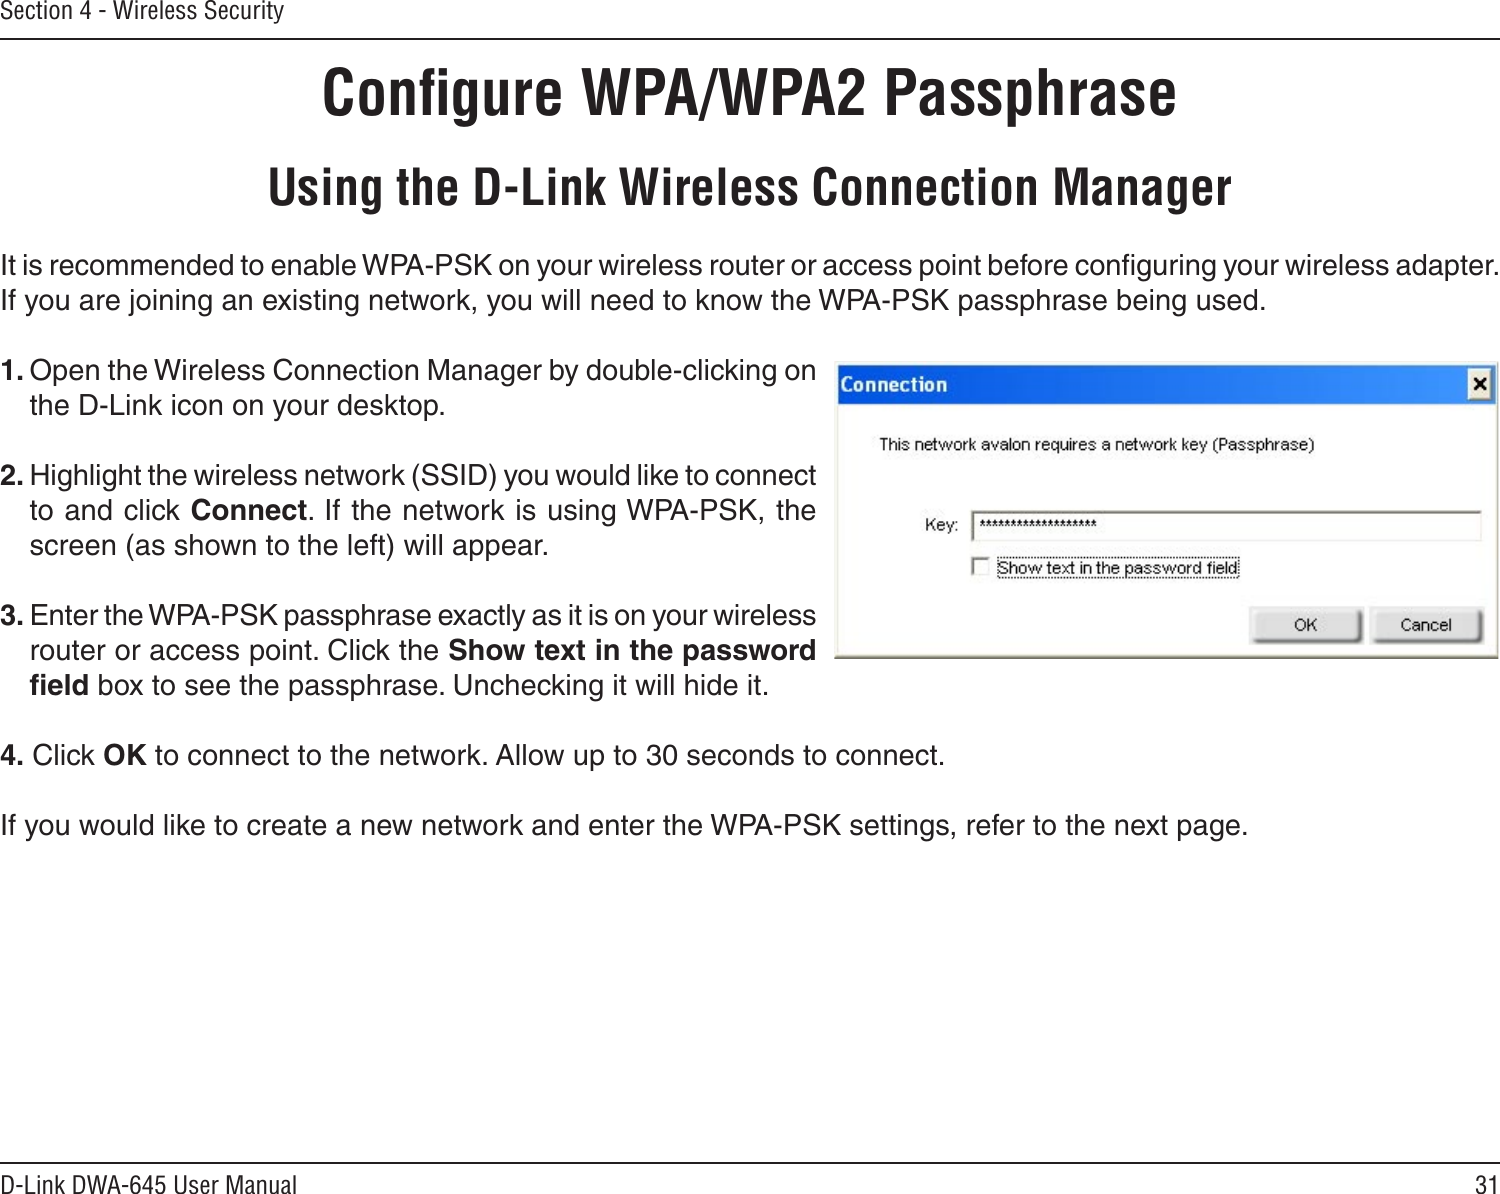 31D-Link DWA-645 User ManualSection 4 - Wireless SecurityConﬁgure WPA/WPA2 PassphraseUsing the D-Link Wireless Connection ManagerIt is recommended to enable WPA-PSK on your wireless router or access point before conﬁguring your wireless adapter. If you are joining an existing network, you will need to know the WPA-PSK passphrase being used.1. Open the Wireless Connection Manager by double-clicking on the D-Link icon on your desktop. 2. Highlight the wireless network (SSID) you would like to connect to and click Connect. If the network is using WPA-PSK, the screen (as shown to the left) will appear. 3. Enter the WPA-PSK passphrase exactly as it is on your wireless router or access point. Click the Show text in the password ﬁeld box to see the passphrase. Unchecking it will hide it.4. Click OK to connect to the network. Allow up to 30 seconds to connect.If you would like to create a new network and enter the WPA-PSK settings, refer to the next page.